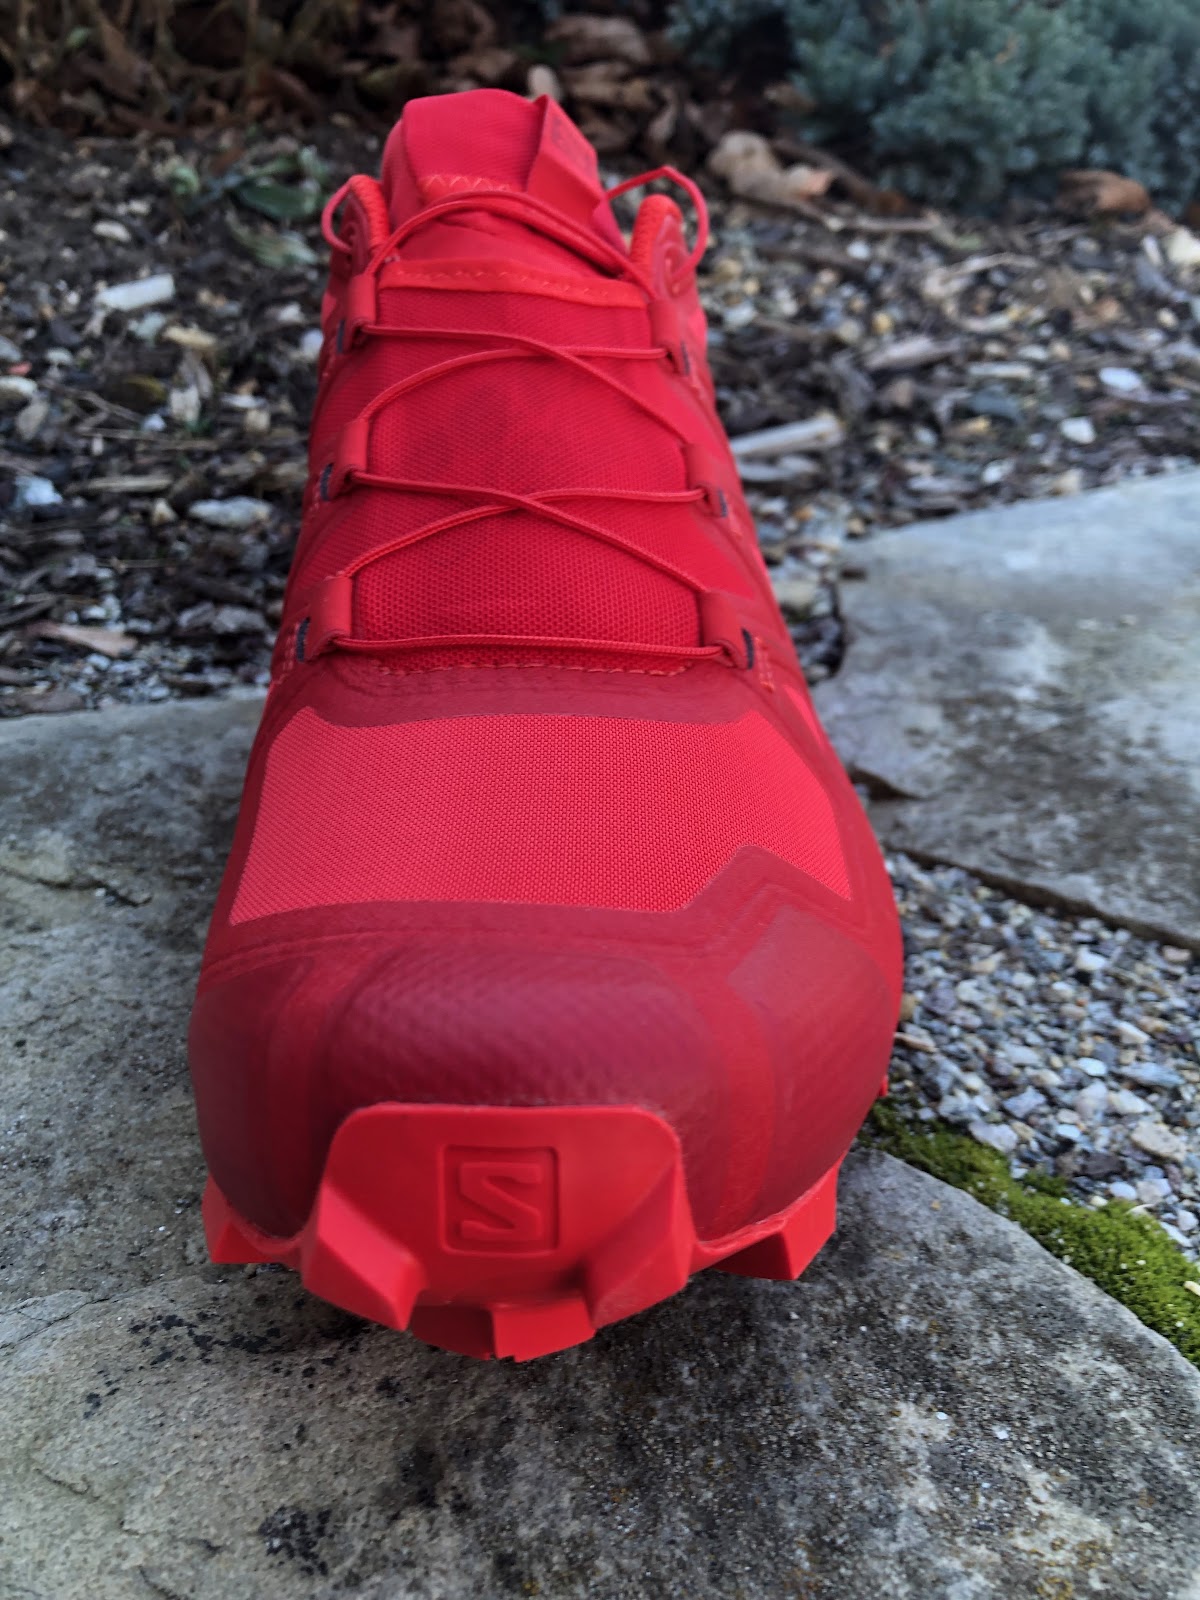 REVIEW: Salomon Speedcross 5 vs. 4  See the differences! - Inspiration